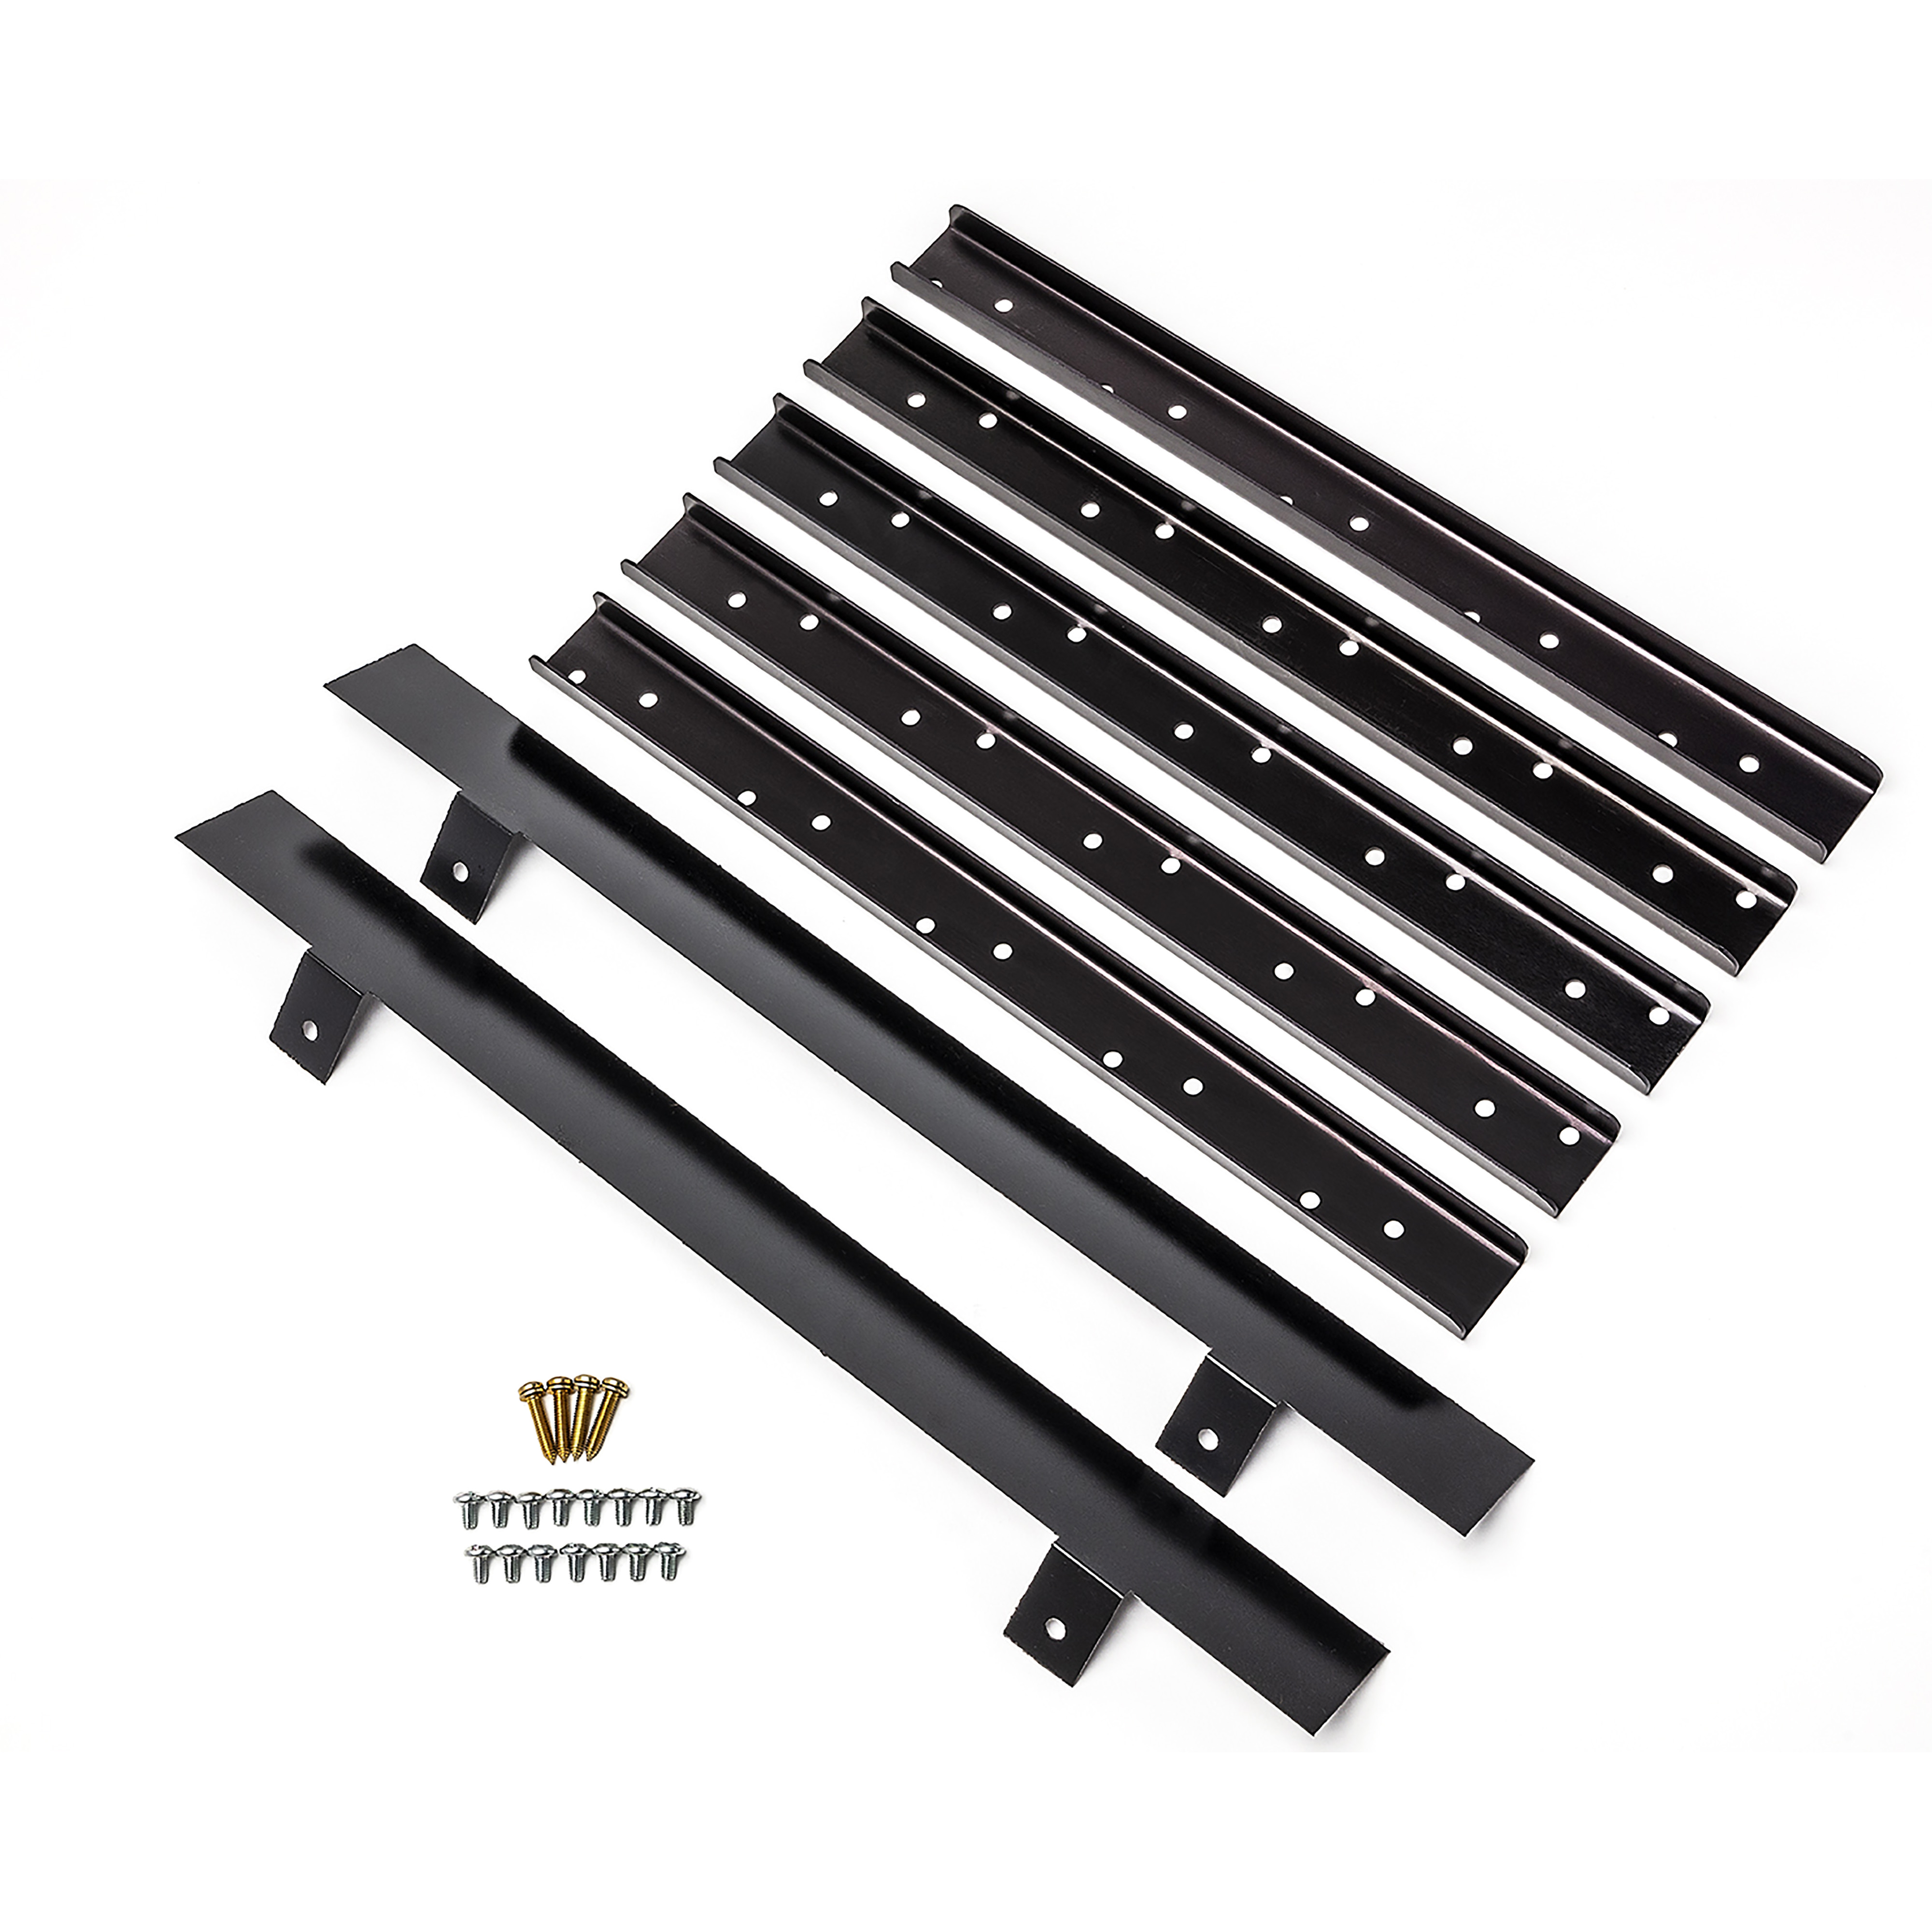 Heat sink kit, NF panelboard accessory, 600A, 42 circuits